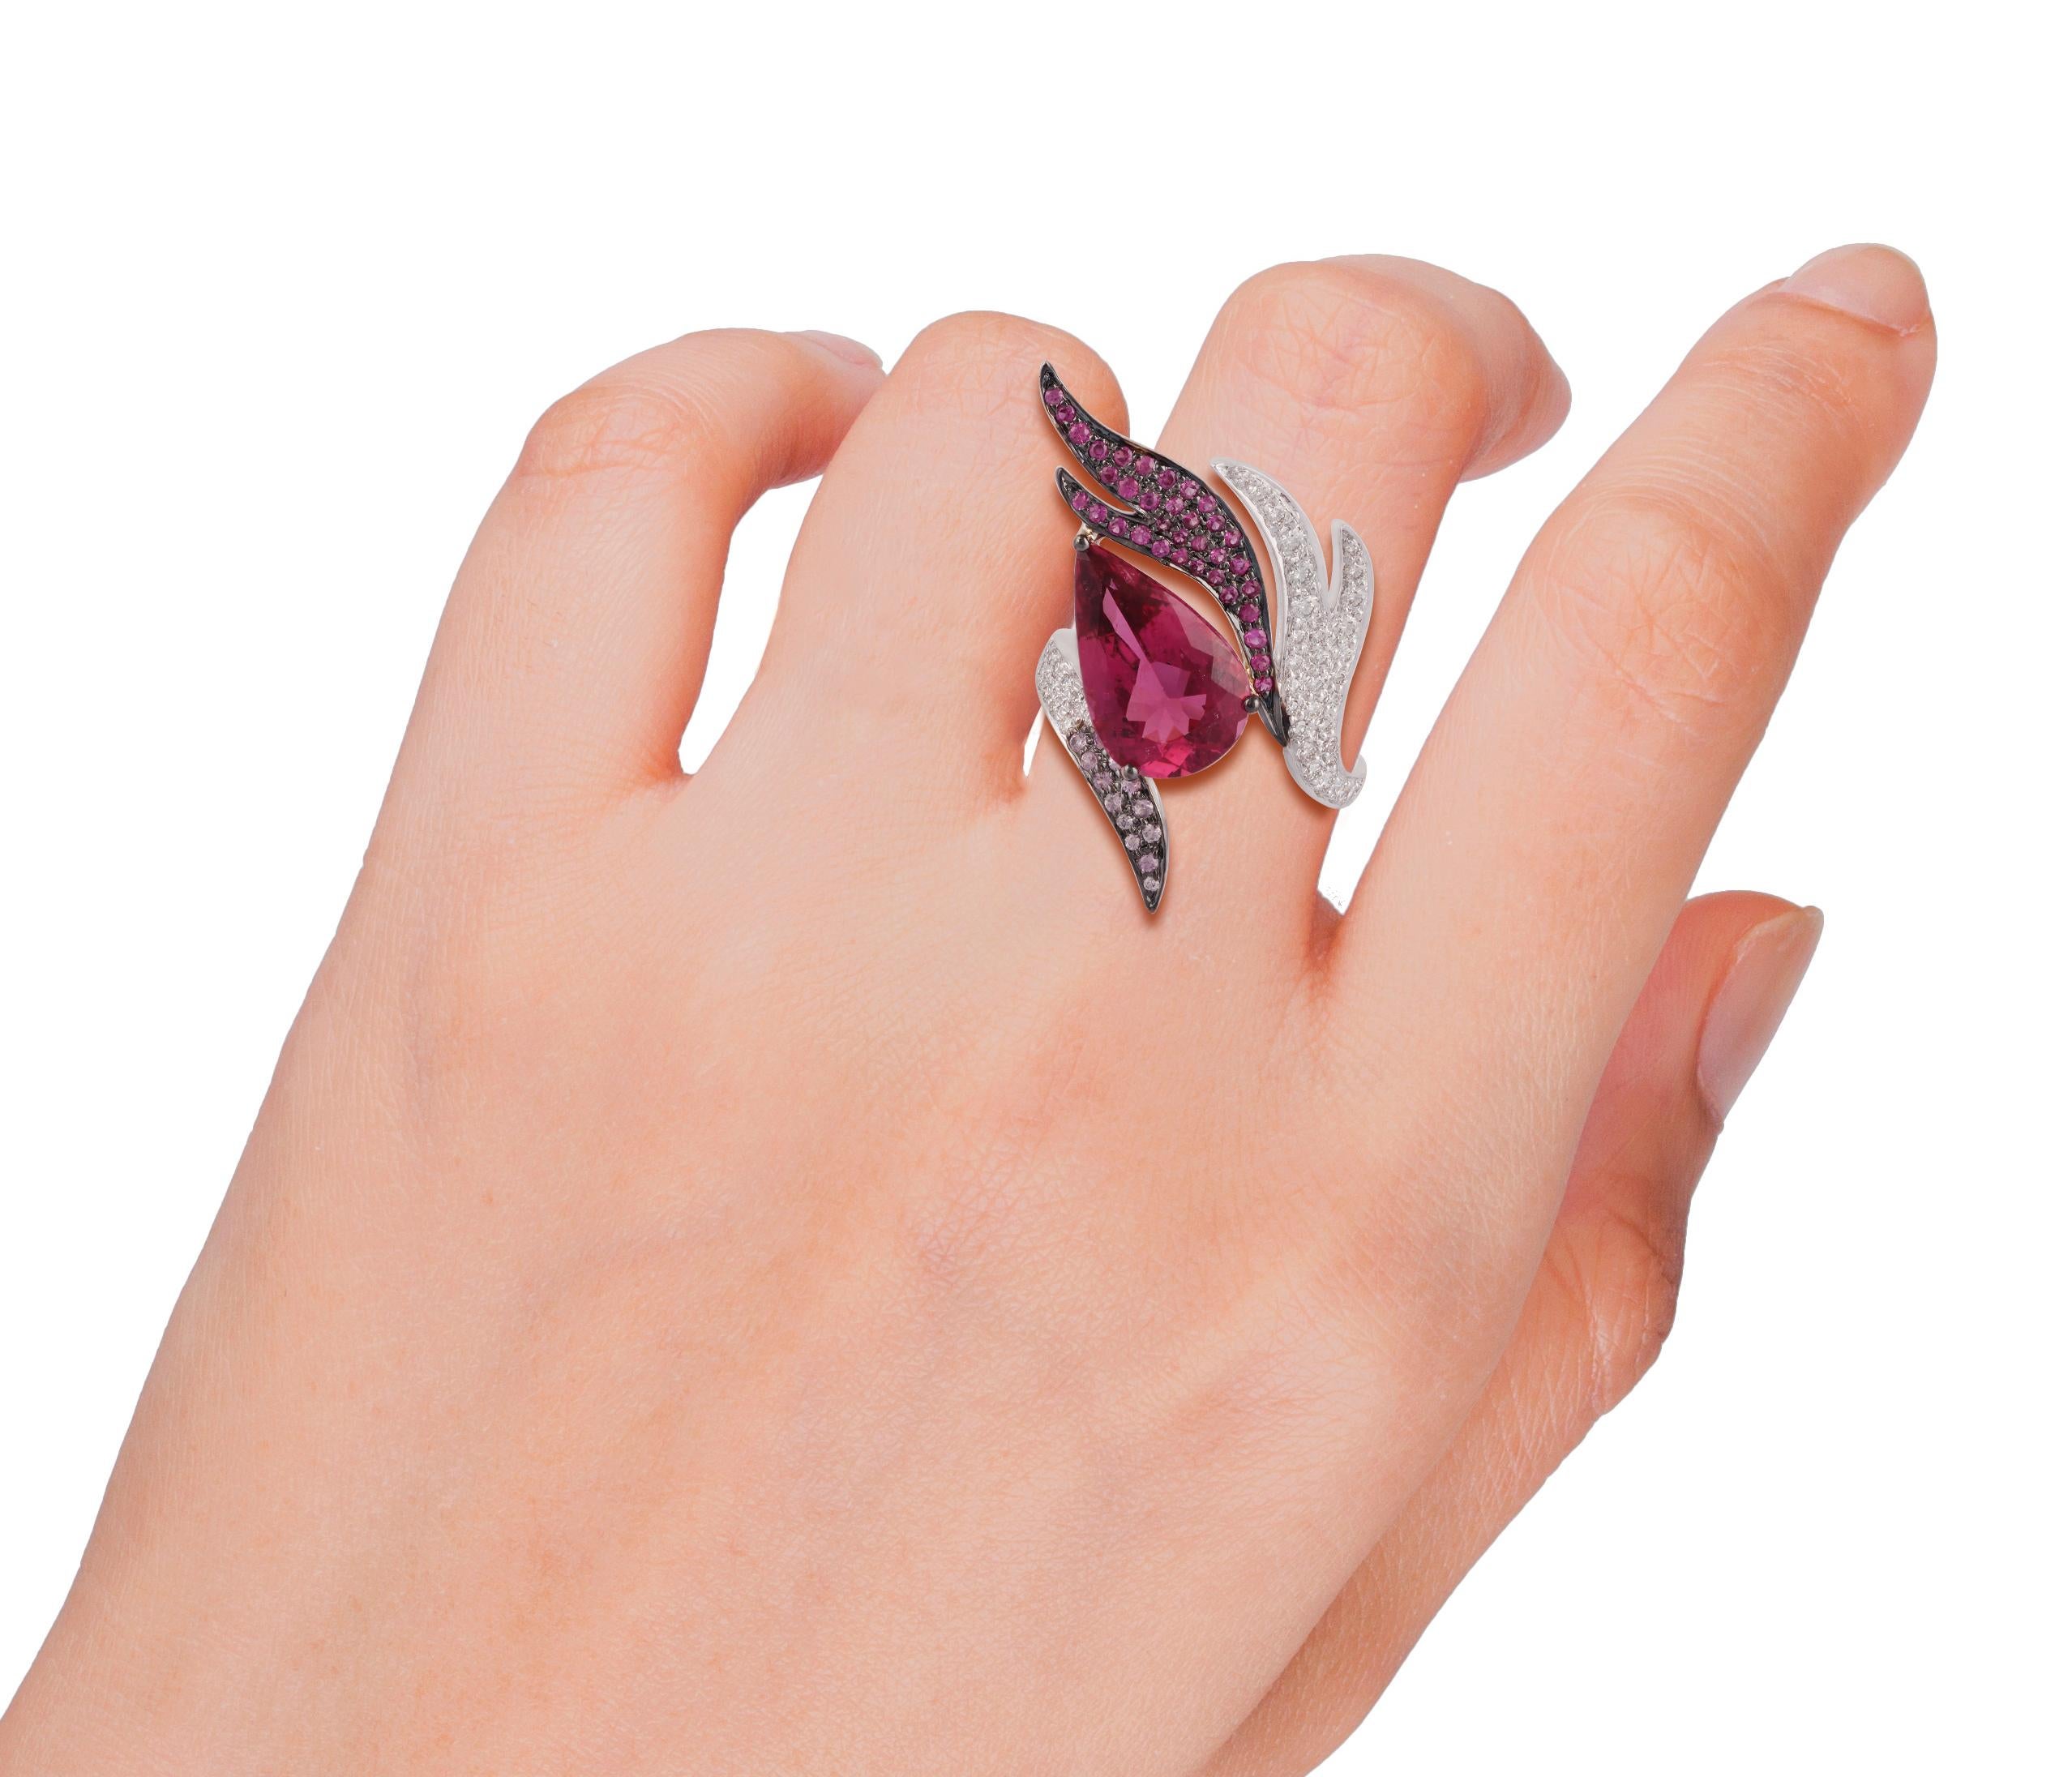 Contemporary 4.10 Carat Rubellite, Pink Sapphire and Diamond Ring Studded in 18 Karat Gold